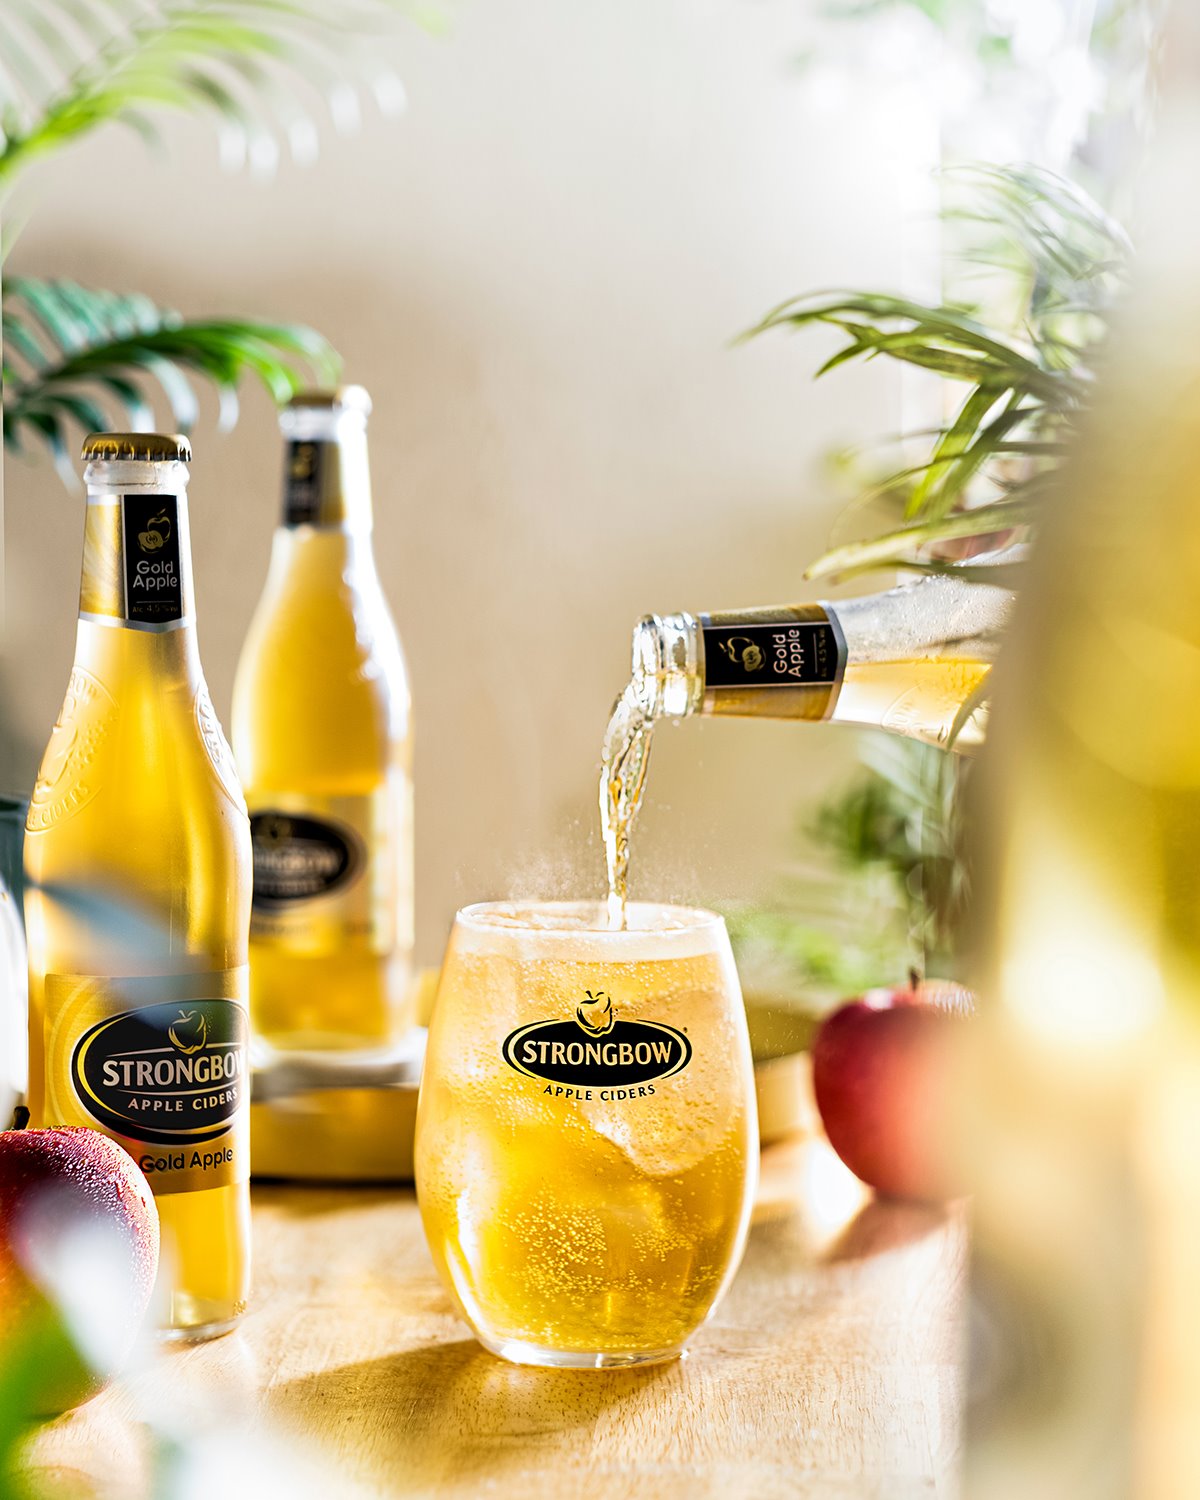 Strongbow Apple Ciders Always On Social Co Maker 2020 VN 1 At Home Gatherings Gold Apple Imagery Social Media Global English